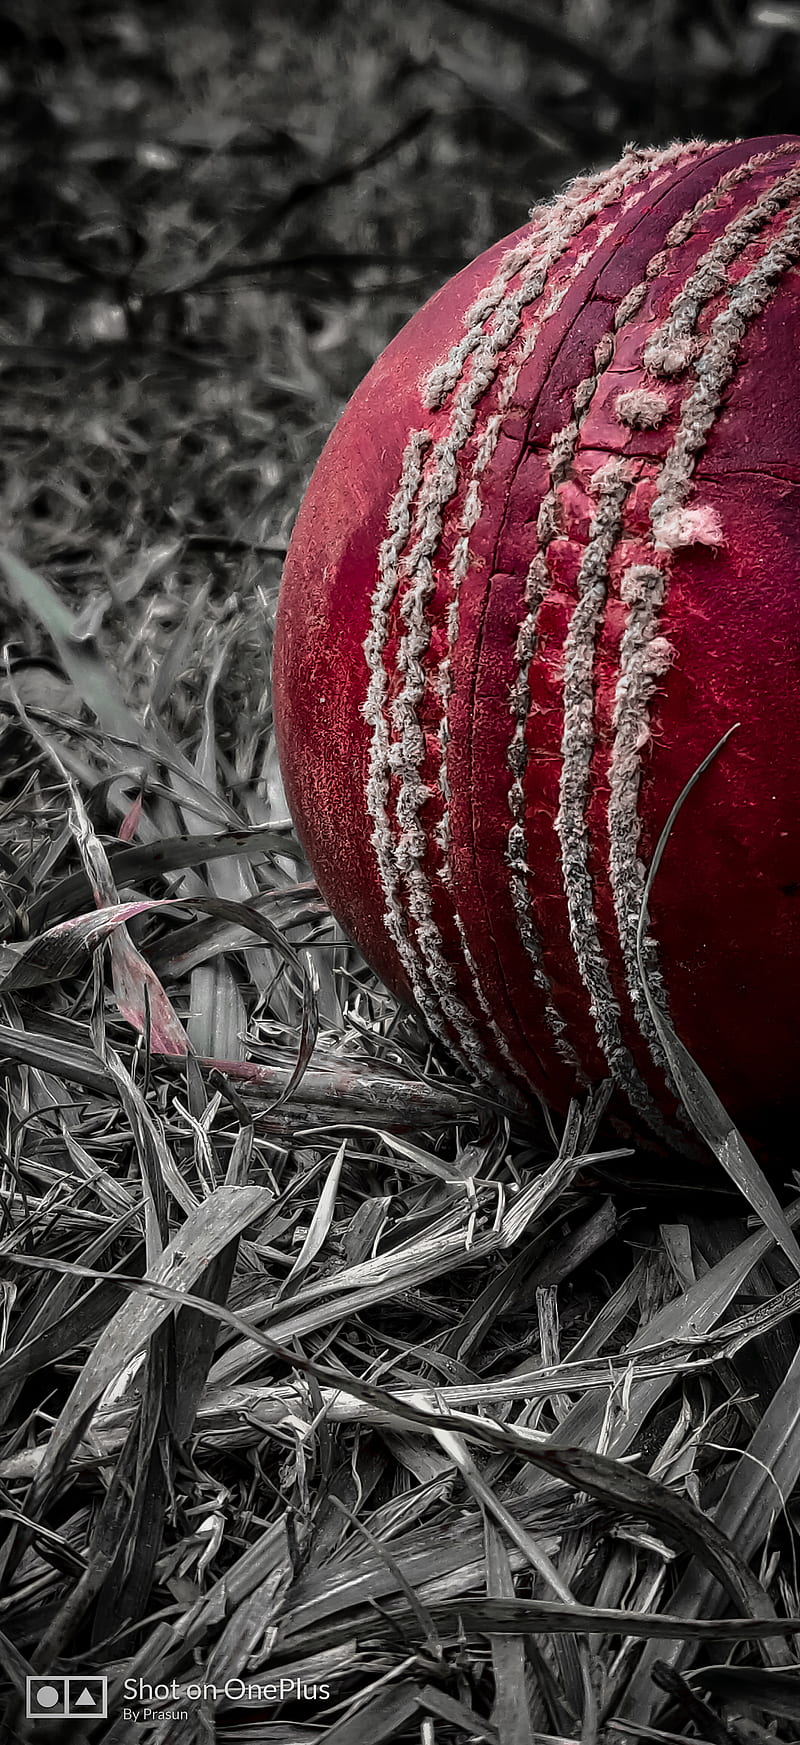 100+ Cricket Wallpaperss [HD] | Download Free Images & Stock Photos On  Unsplash